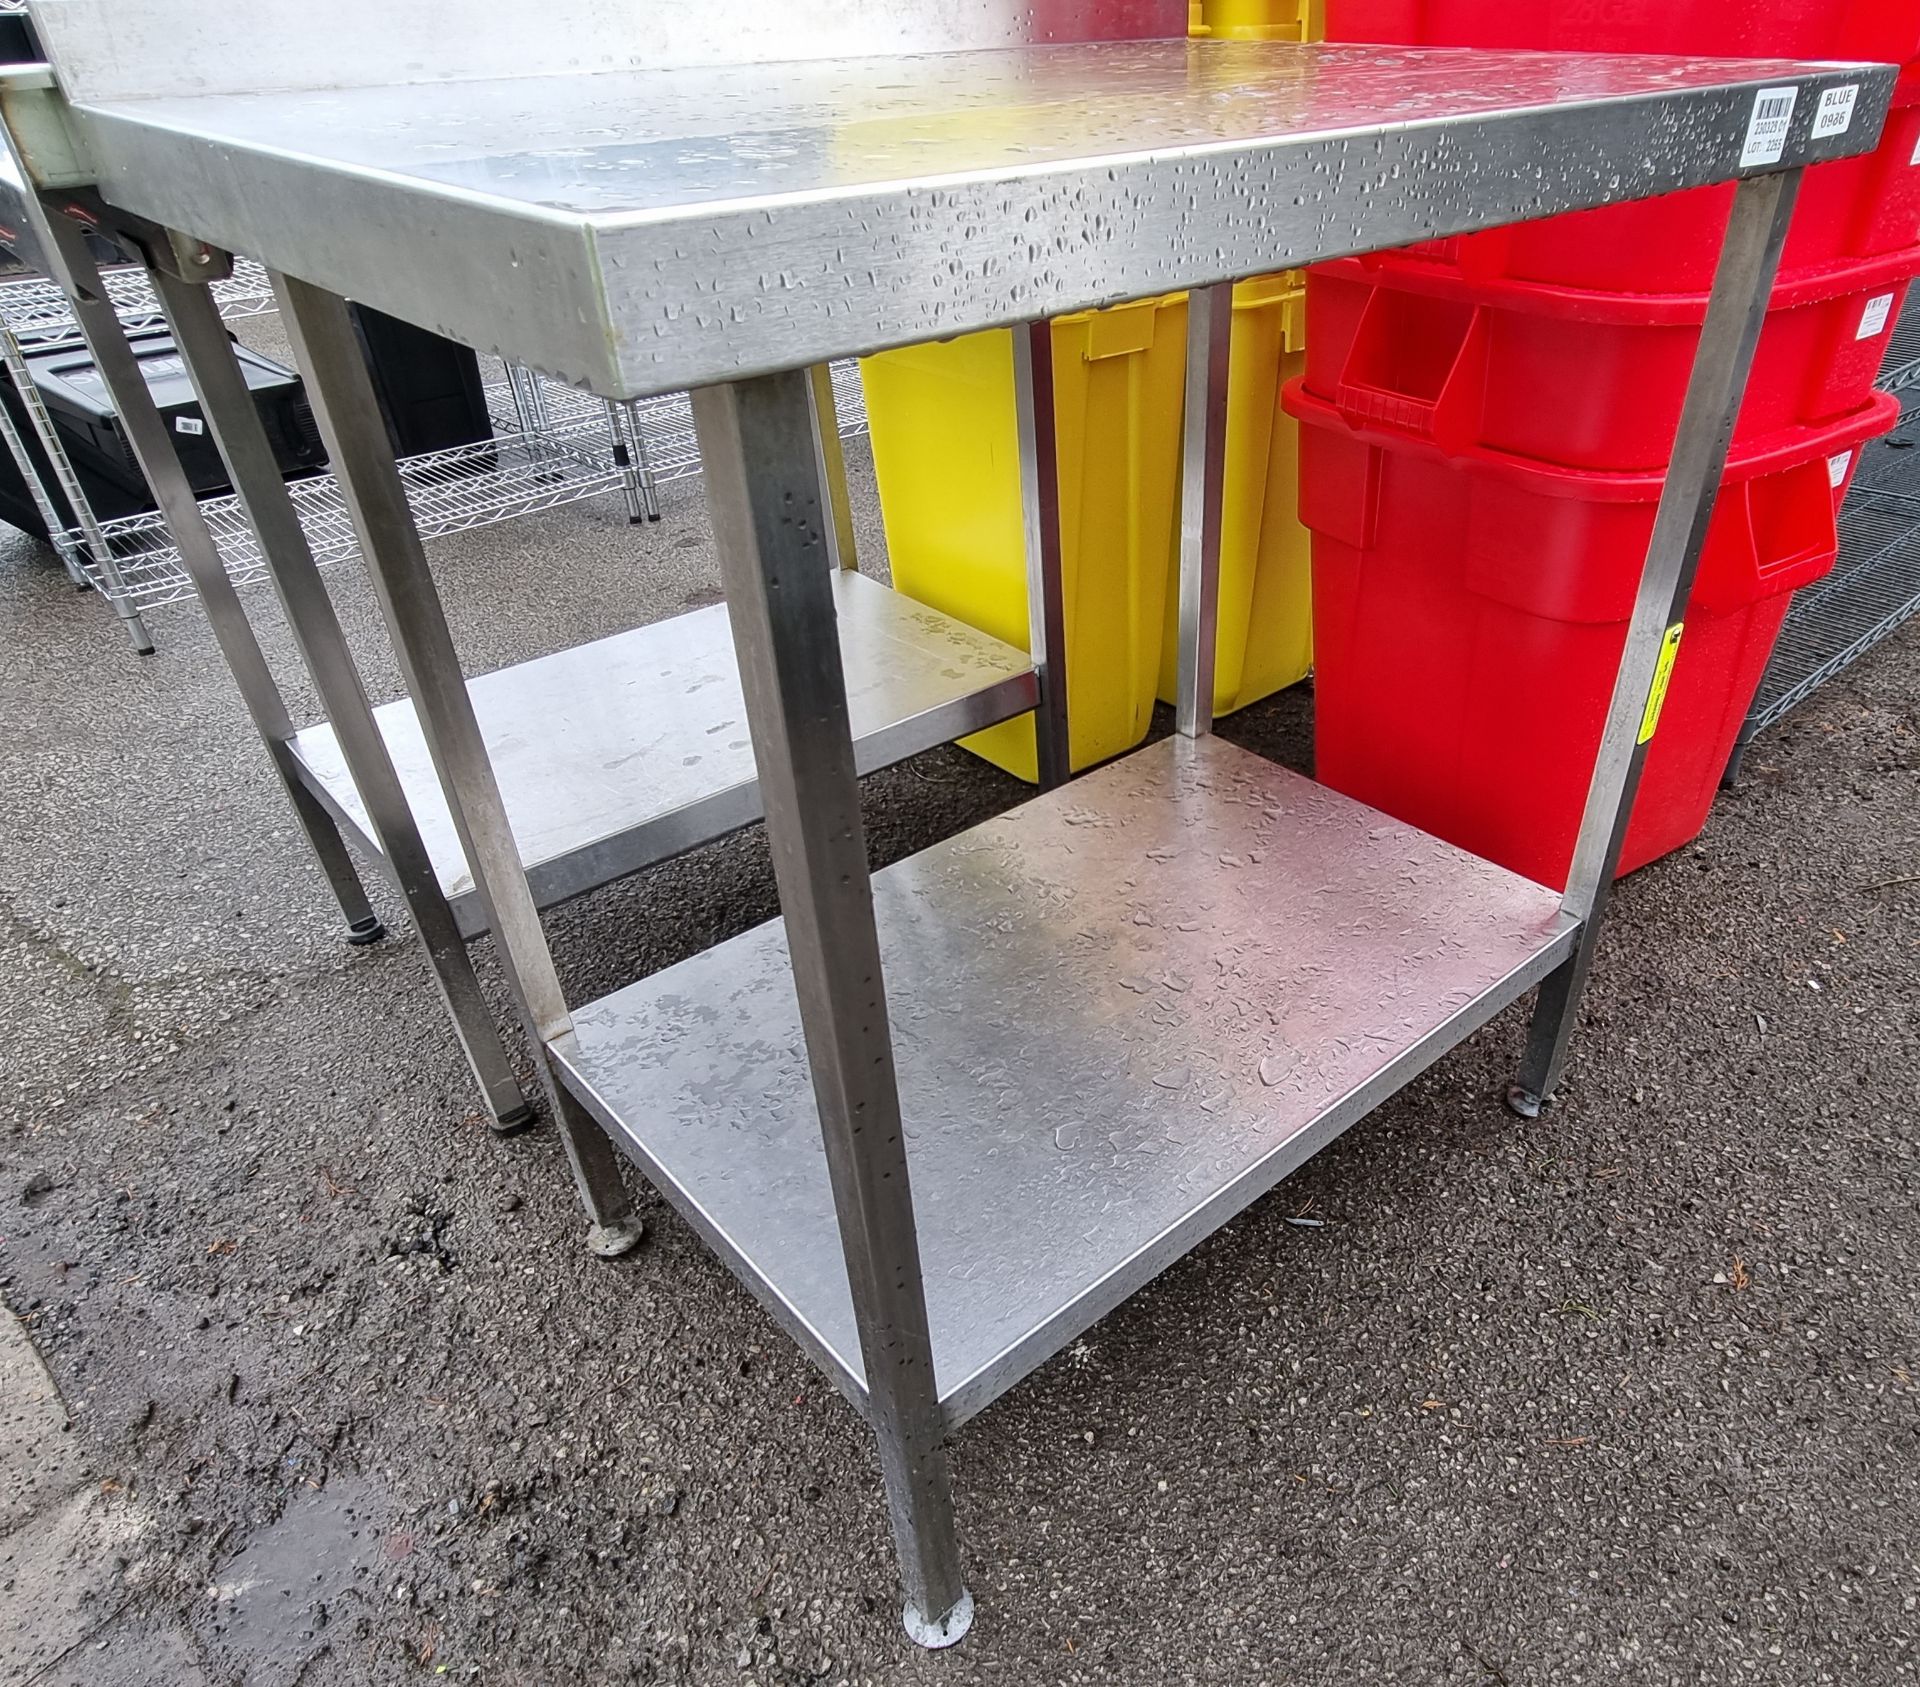 Stainless steel table with bottom shelf and upstand - dimensions: 90 x 65 x 95cm - Image 2 of 2